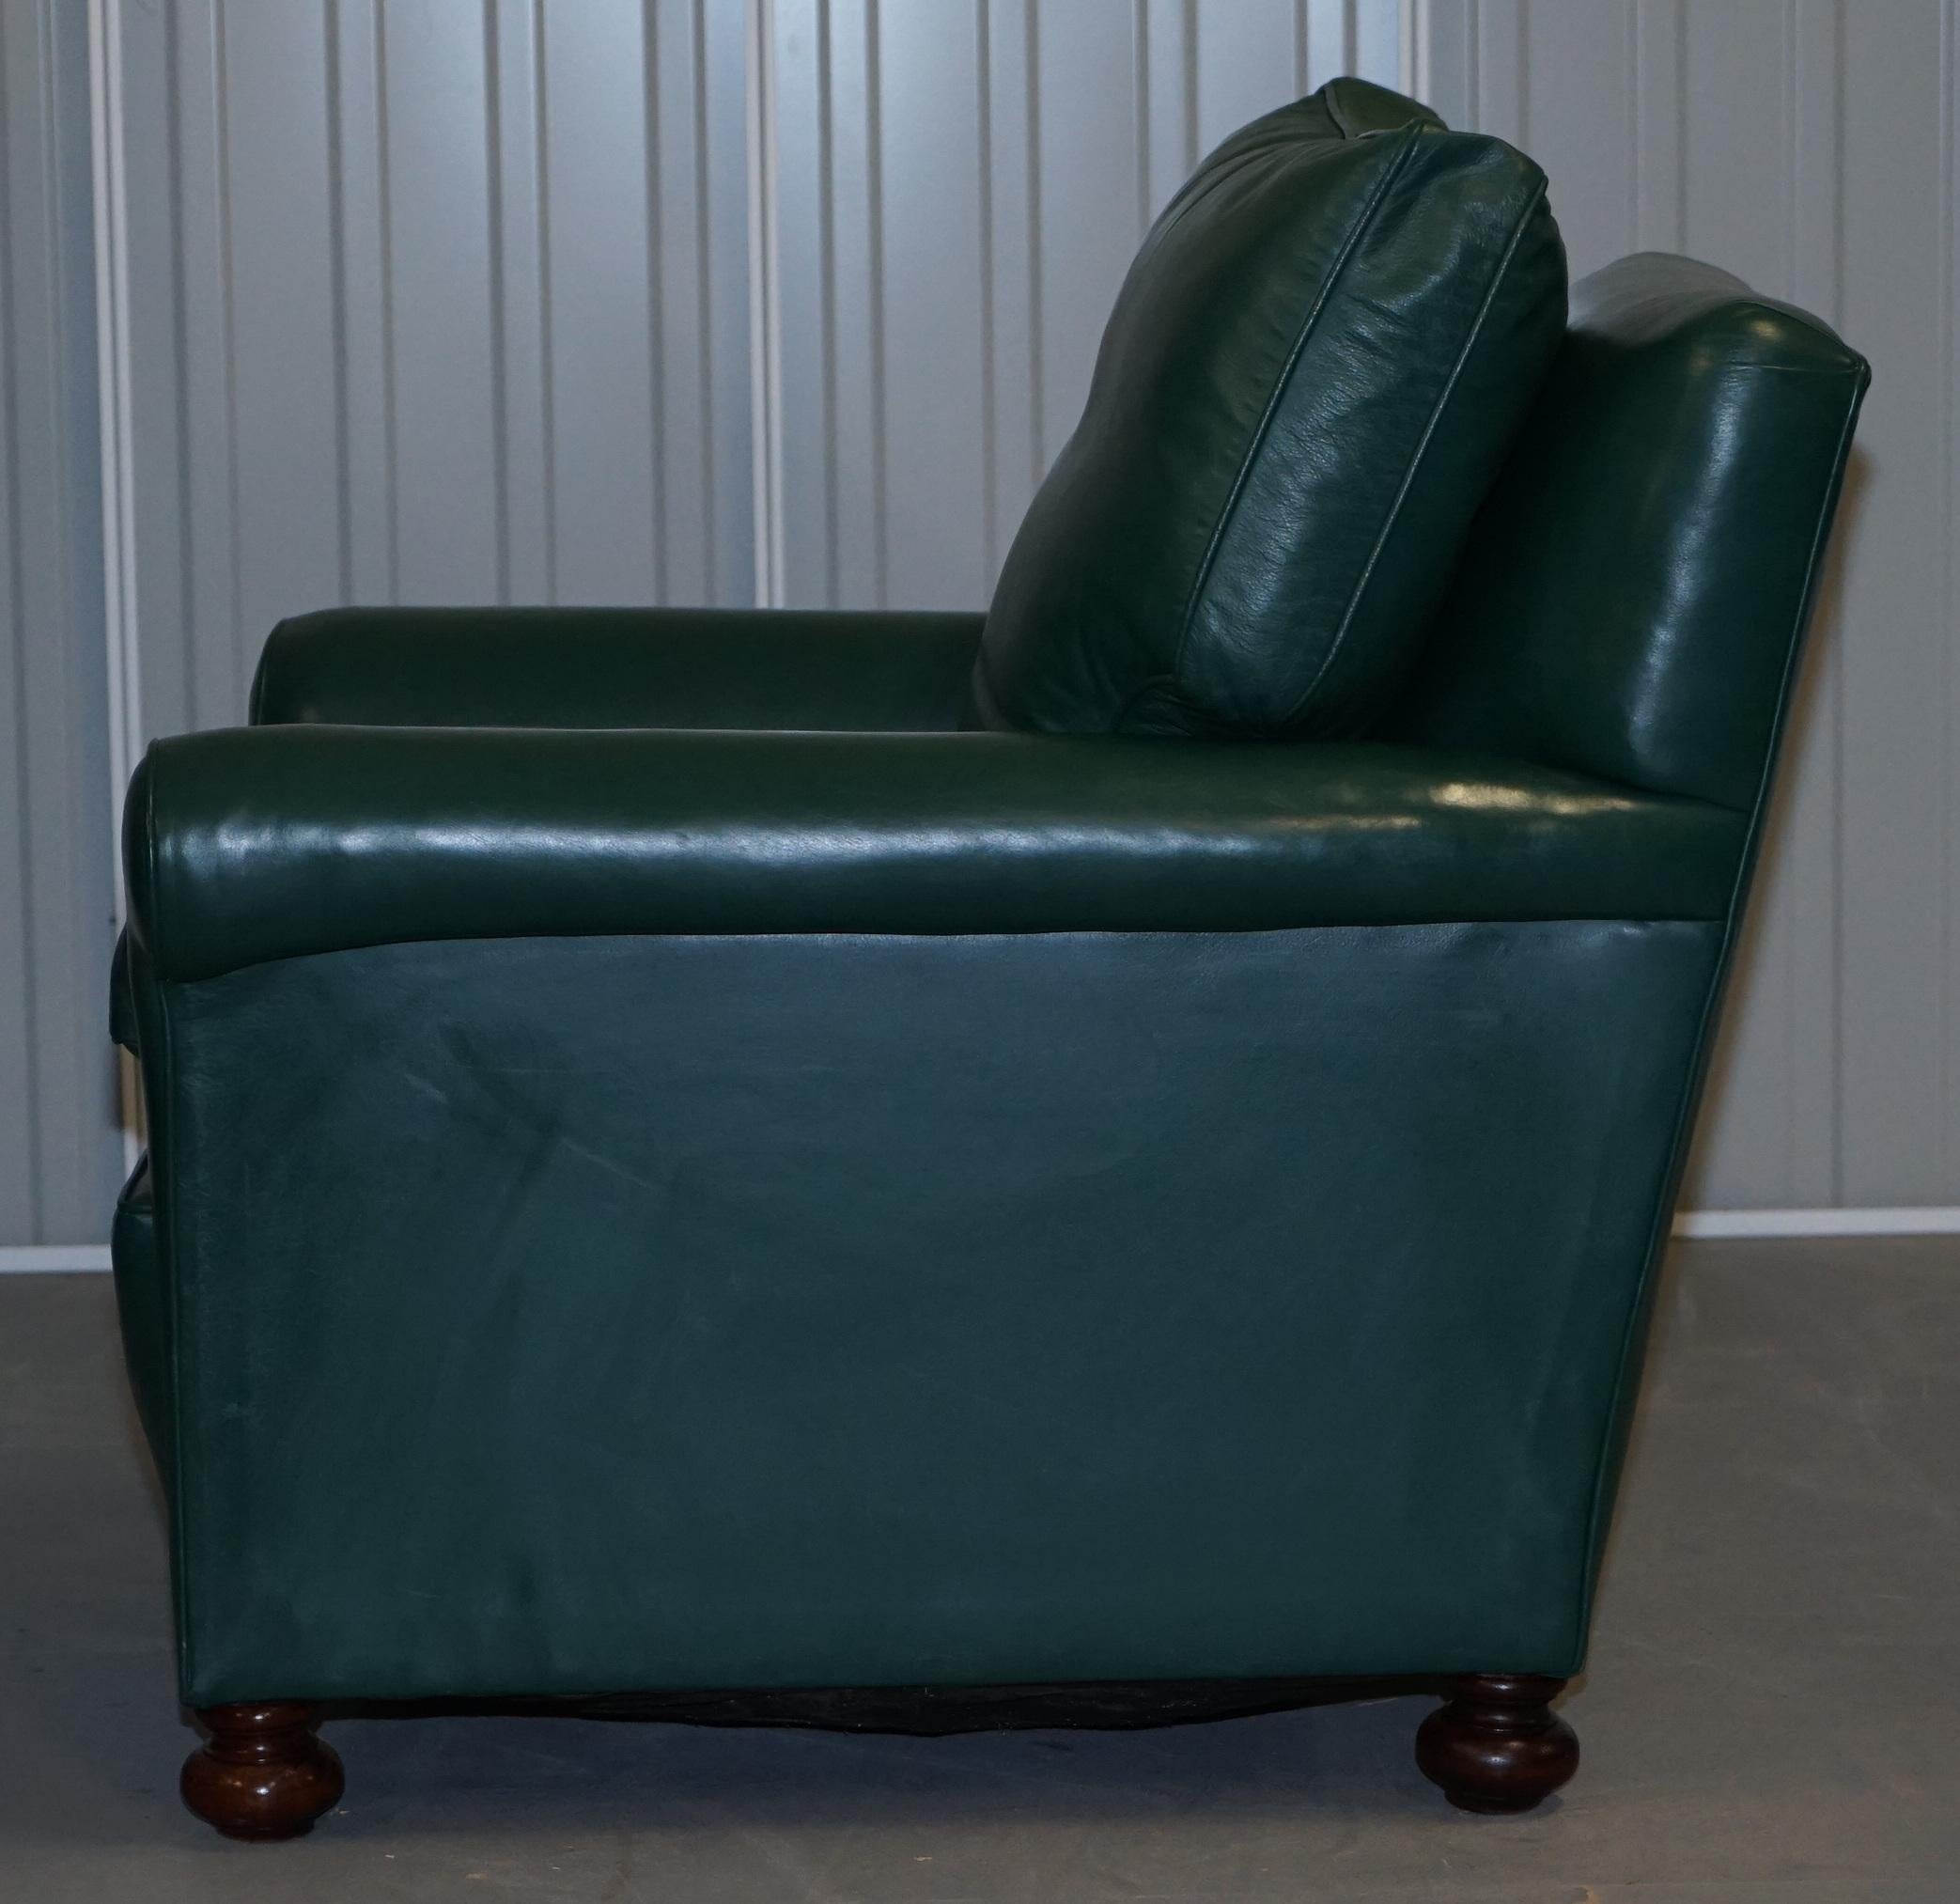 Pair of Edwardian circa 1910 Soft Green Leather Feather Filled Cushion Armchairs 3